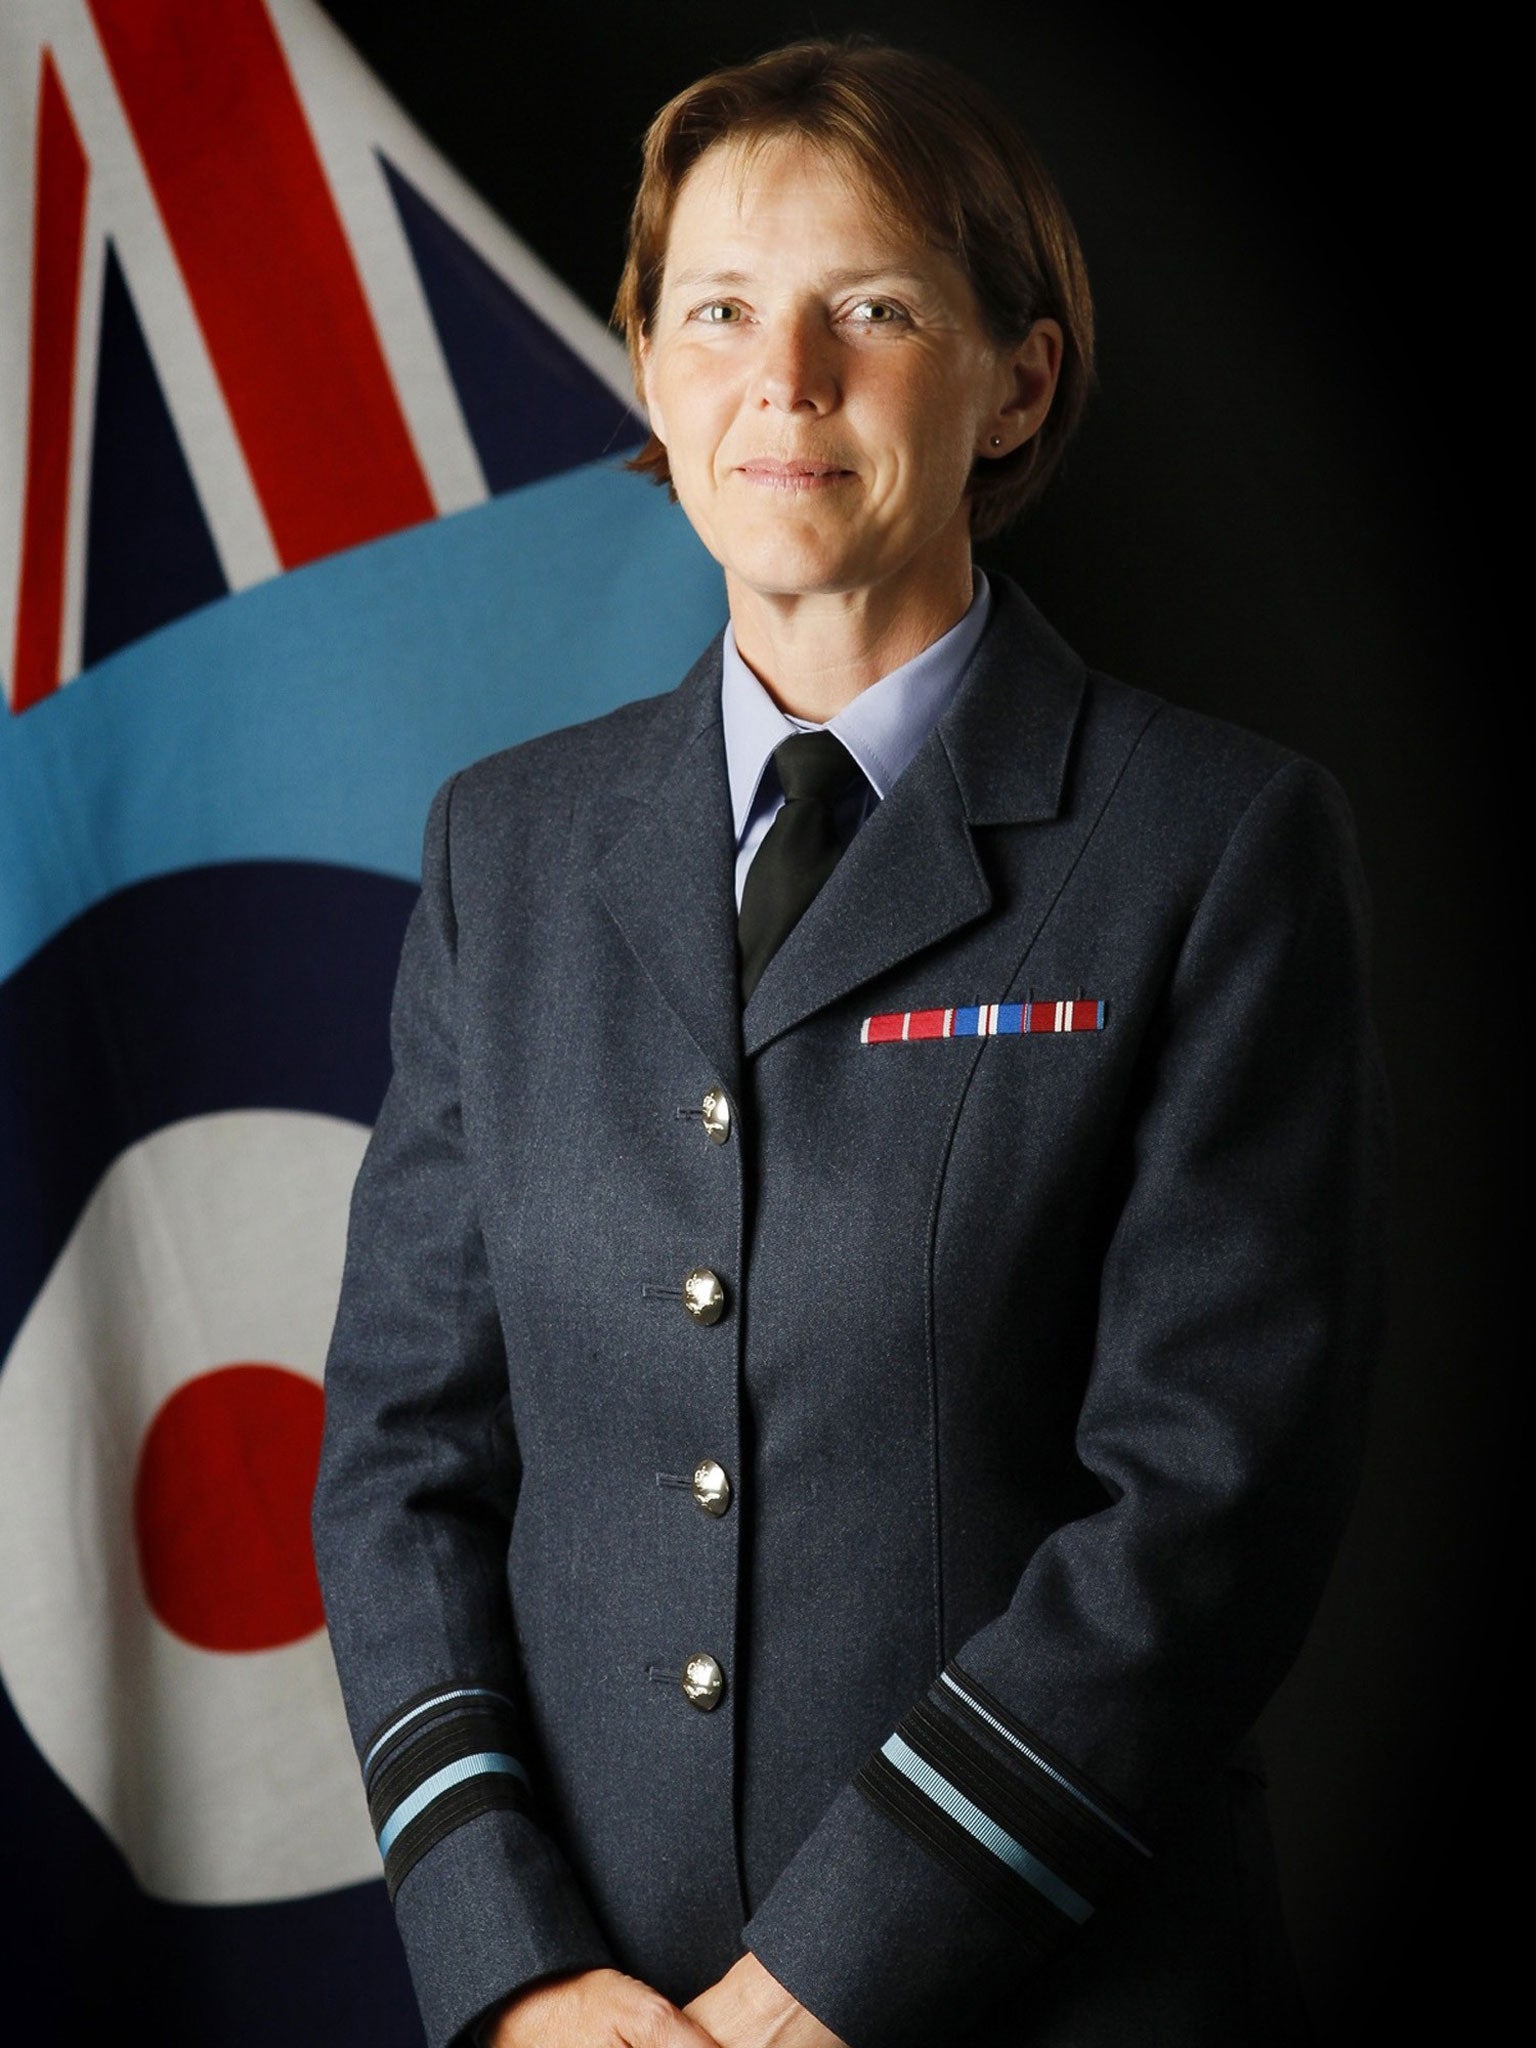 Vice-Marshal Elaine West, 51, has become the RAF's first ever female two-star officer